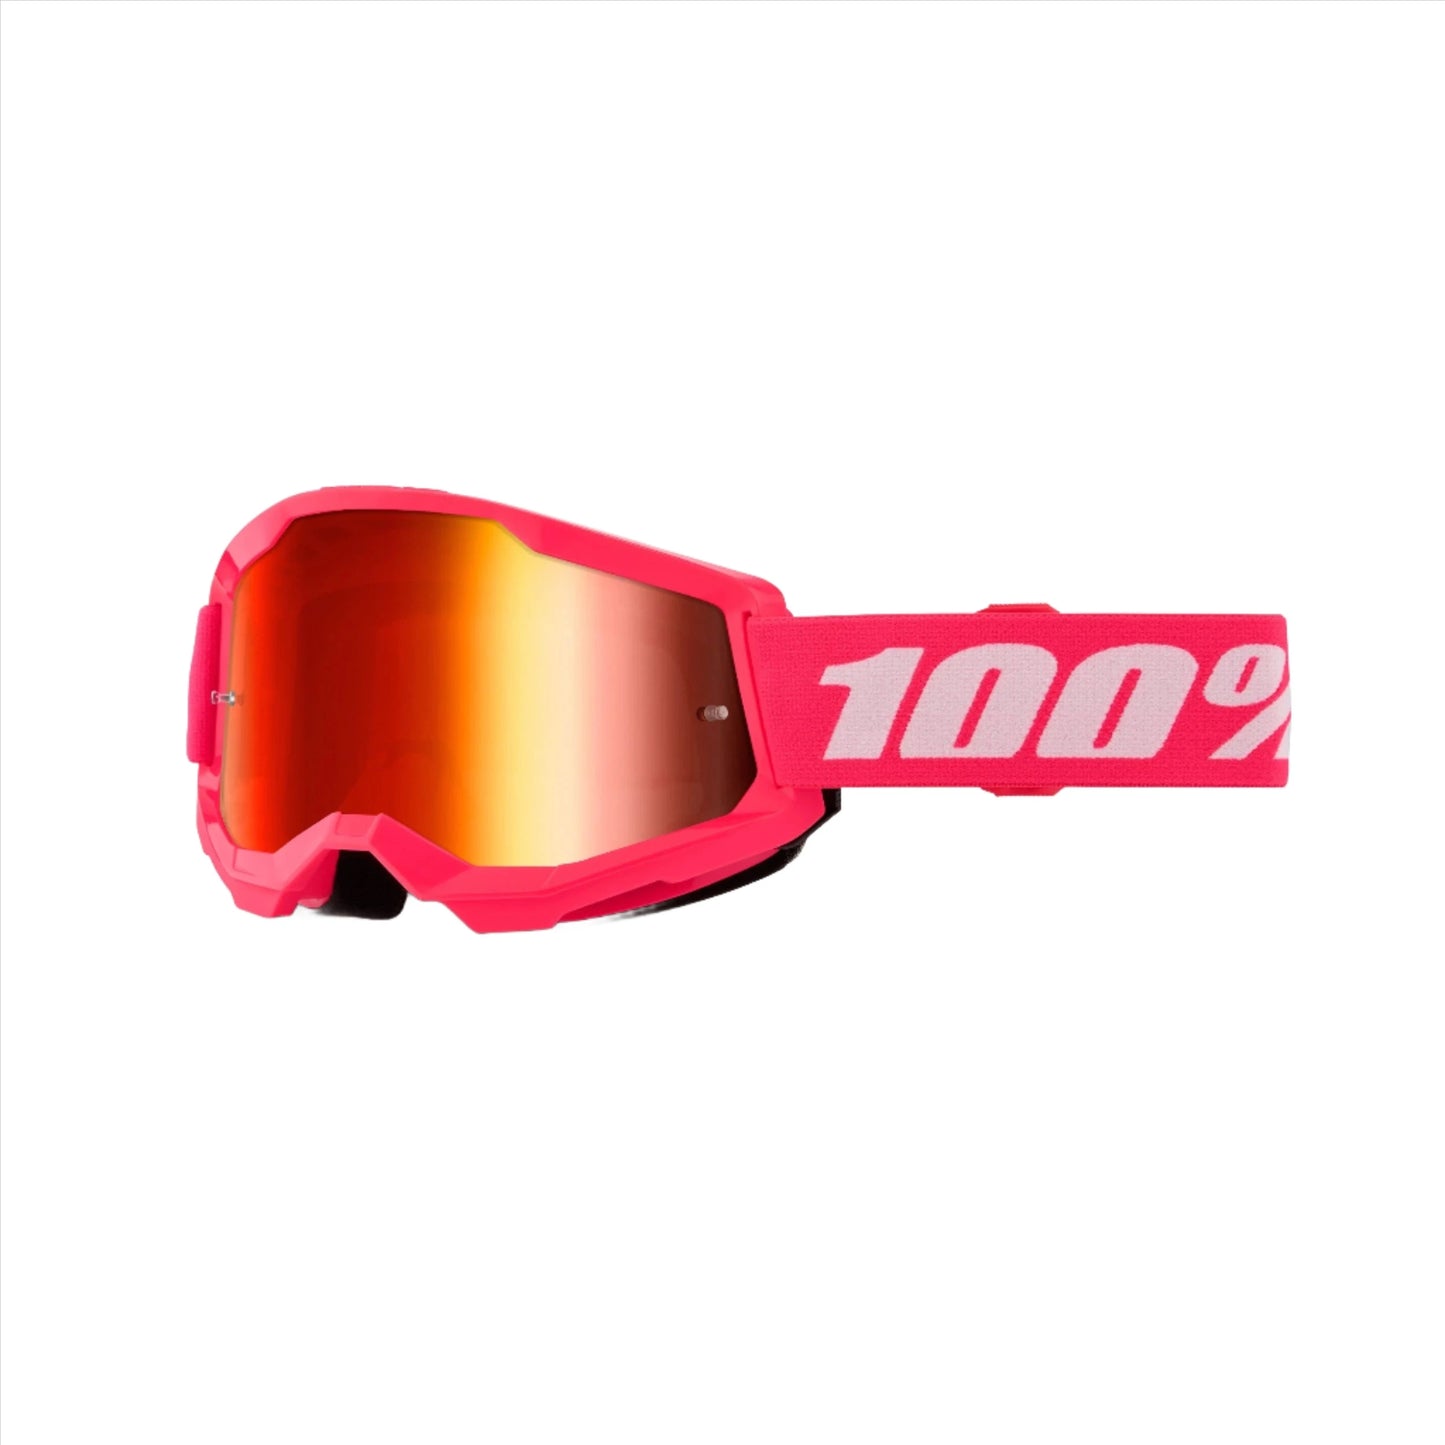 100 Percent Strata 2 Goggles - One Size Fits Most - Pink - Mirror Red Lens